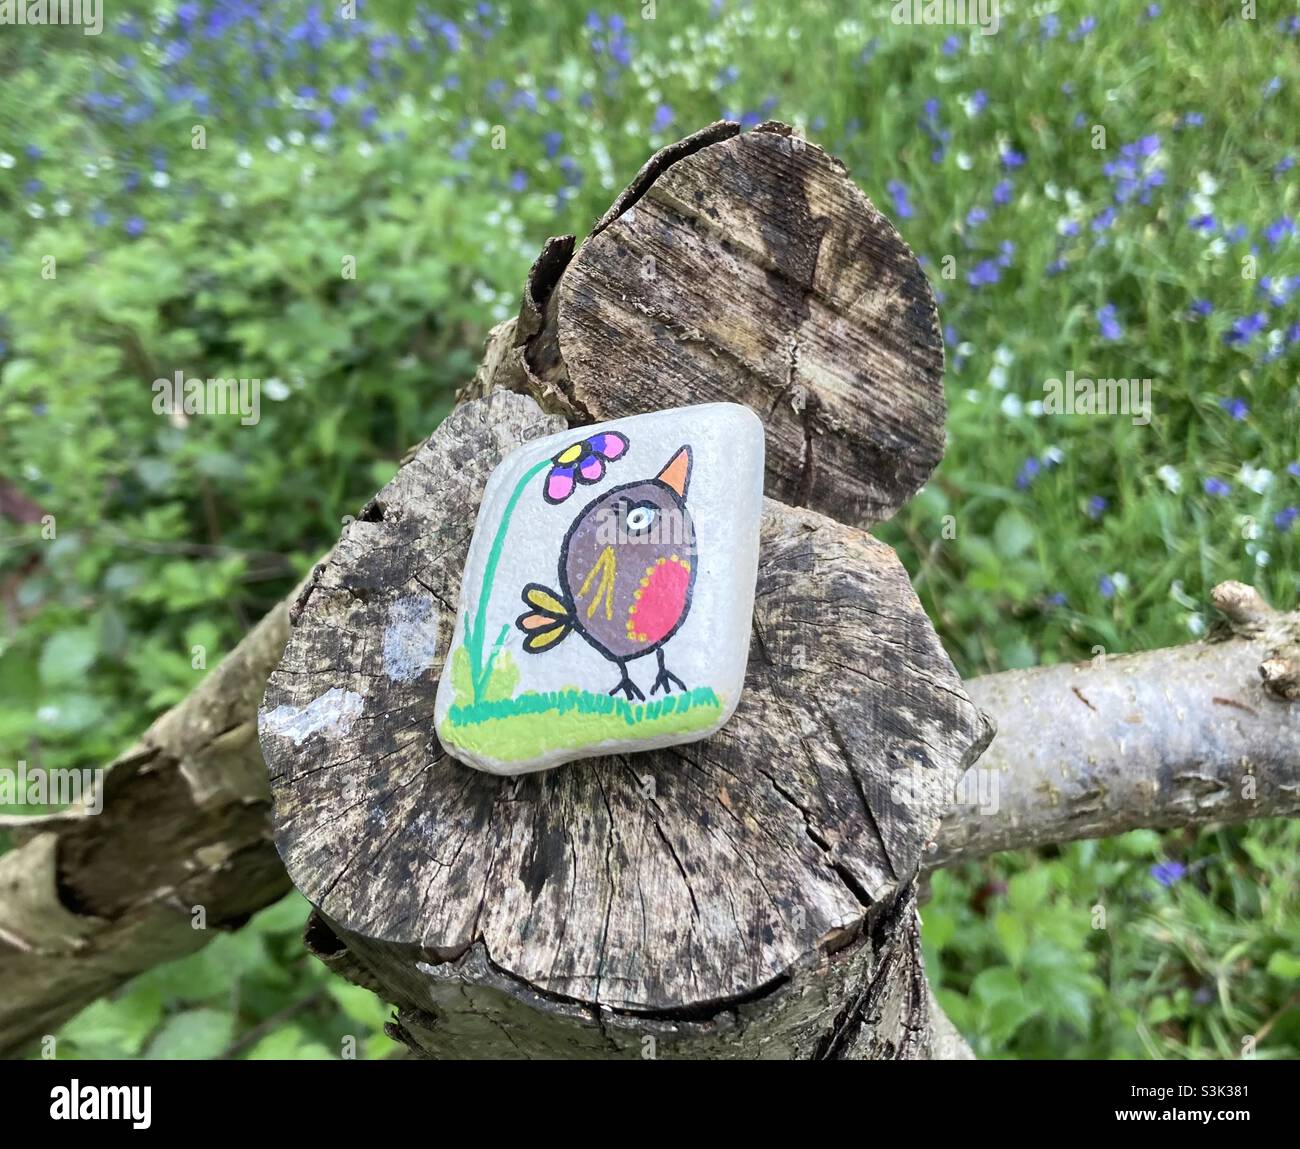 A Kindness Rock depicting a hand painted Robin bird and flower, found in a tree stump in Foxley Woods, Norfolk May 2021. Stock Photo